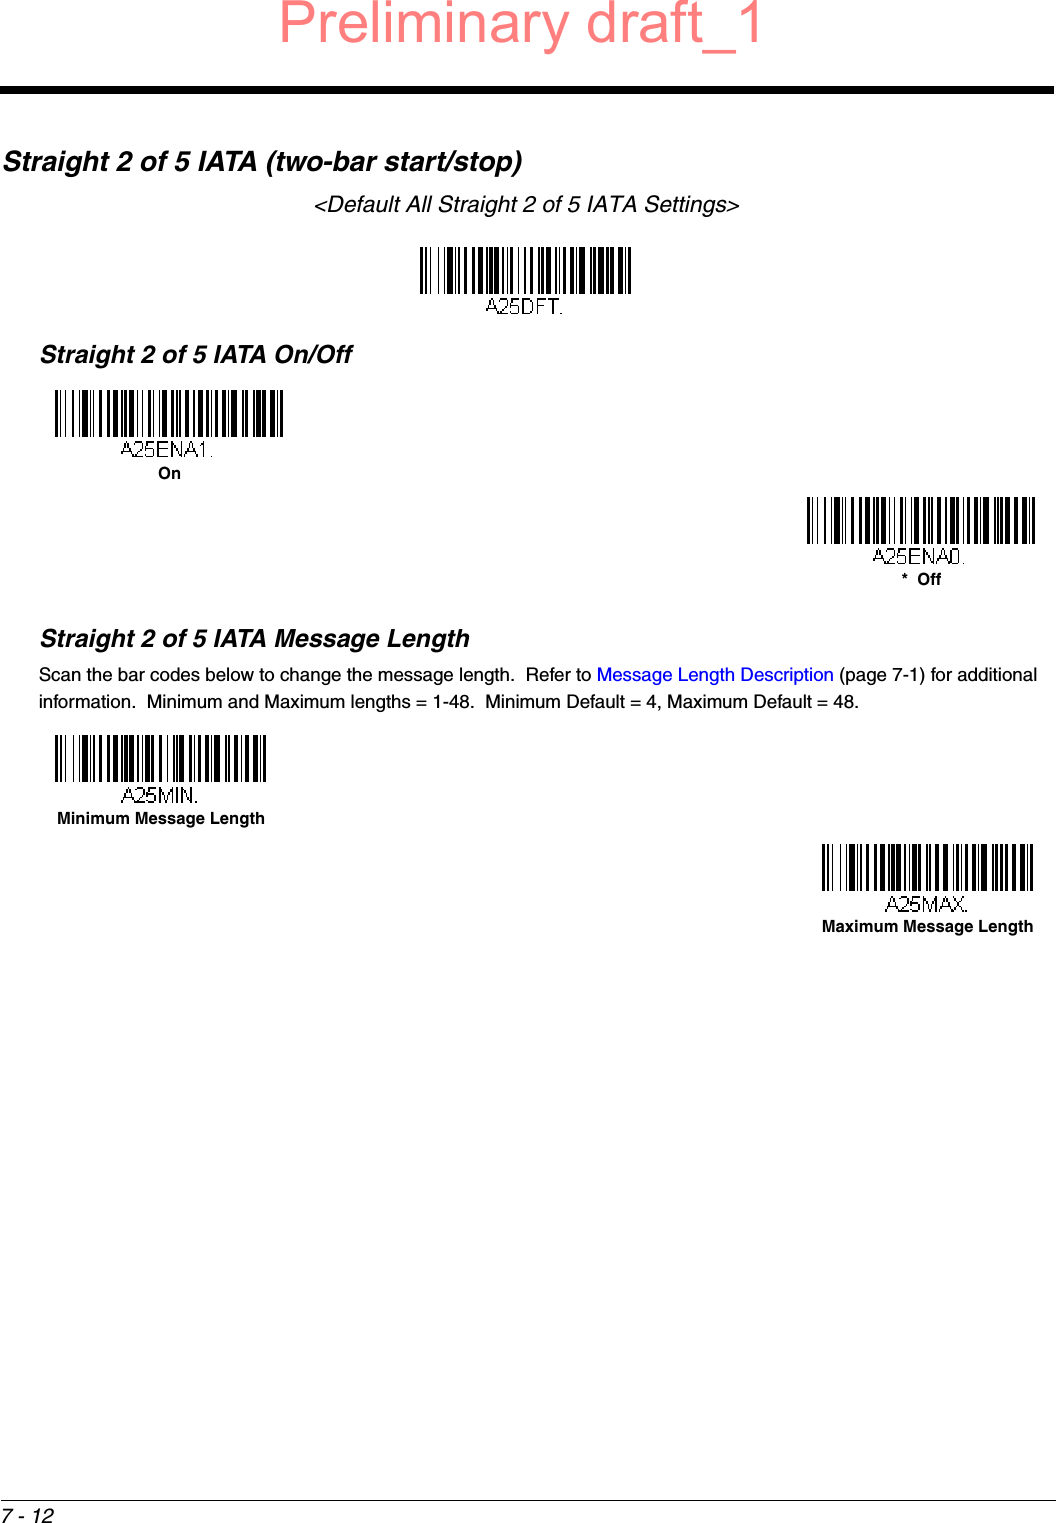 7 - 12Straight 2 of 5 IATA (two-bar start/stop)&lt;Default All Straight 2 of 5 IATA Settings&gt;Straight 2 of 5 IATA On/OffStraight 2 of 5 IATA Message LengthScan the bar codes below to change the message length.  Refer to Message Length Description (page 7-1) for additional information.  Minimum and Maximum lengths = 1-48.  Minimum Default = 4, Maximum Default = 48.On*  OffMinimum Message LengthMaximum Message LengthPreliminary draft_1